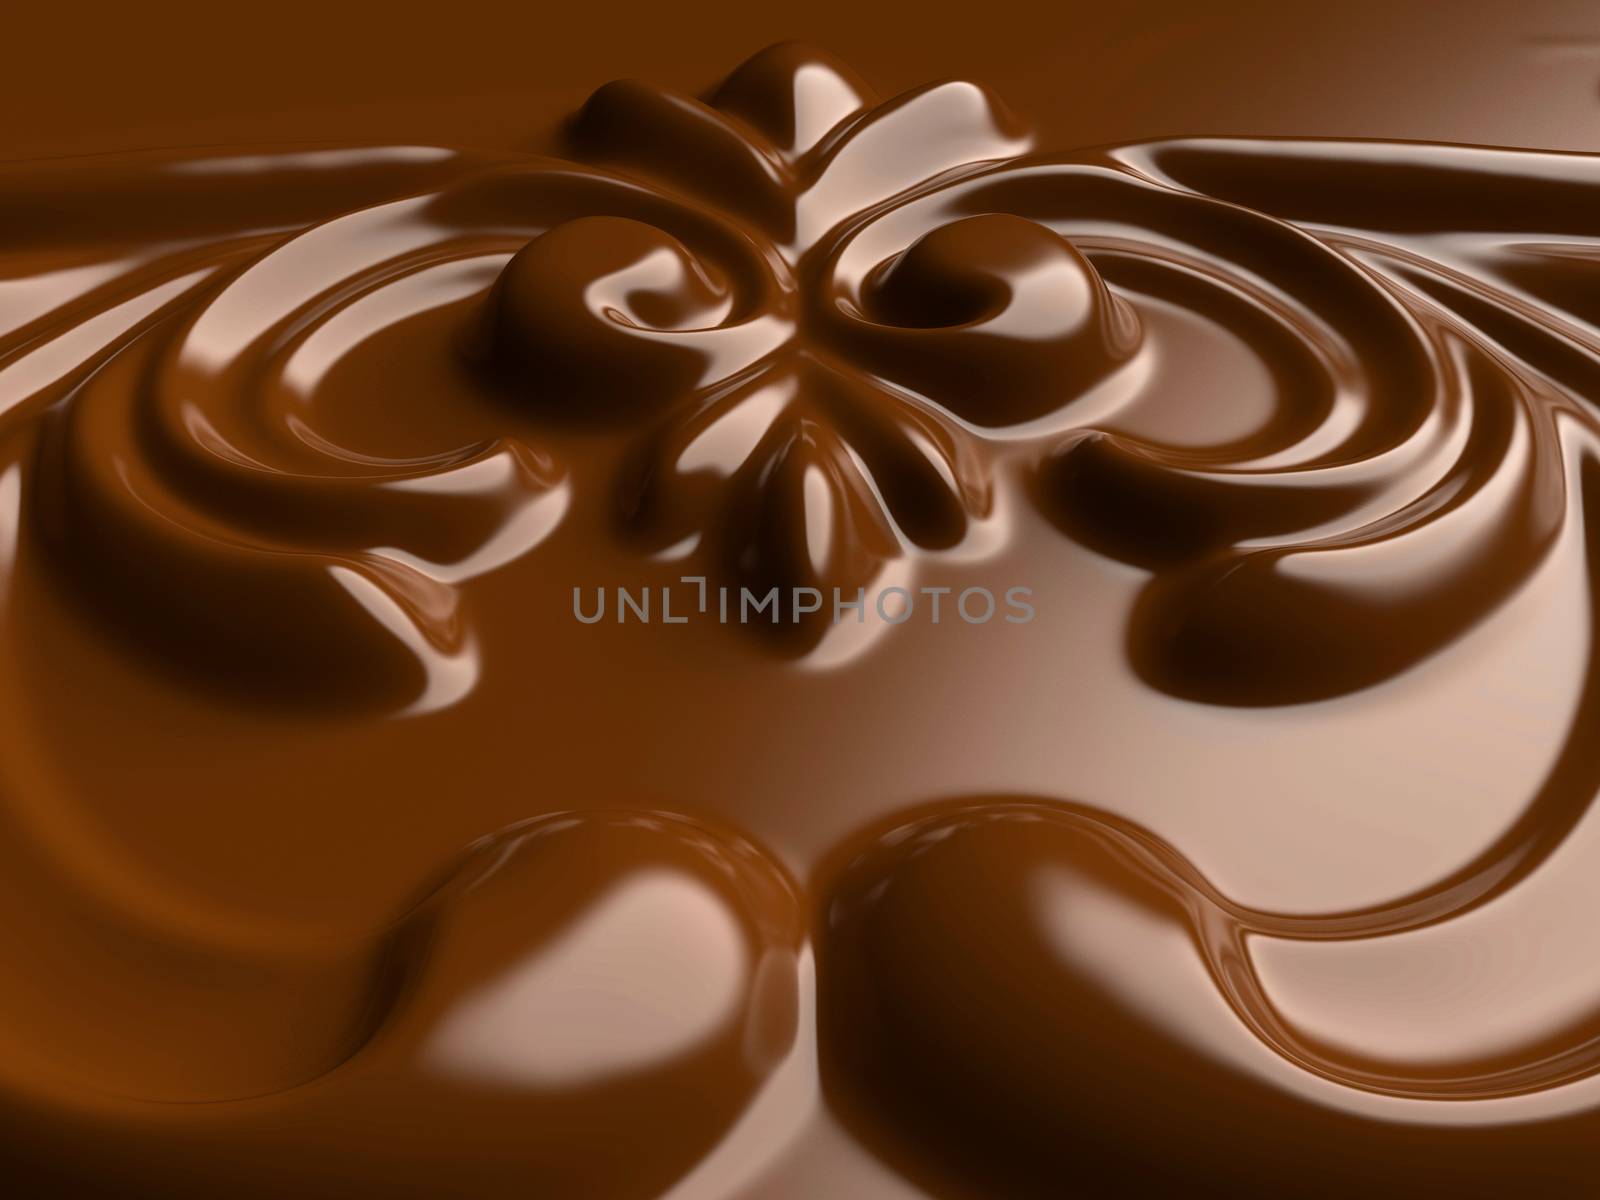 close-up of brown chocolate ornamental pattern.